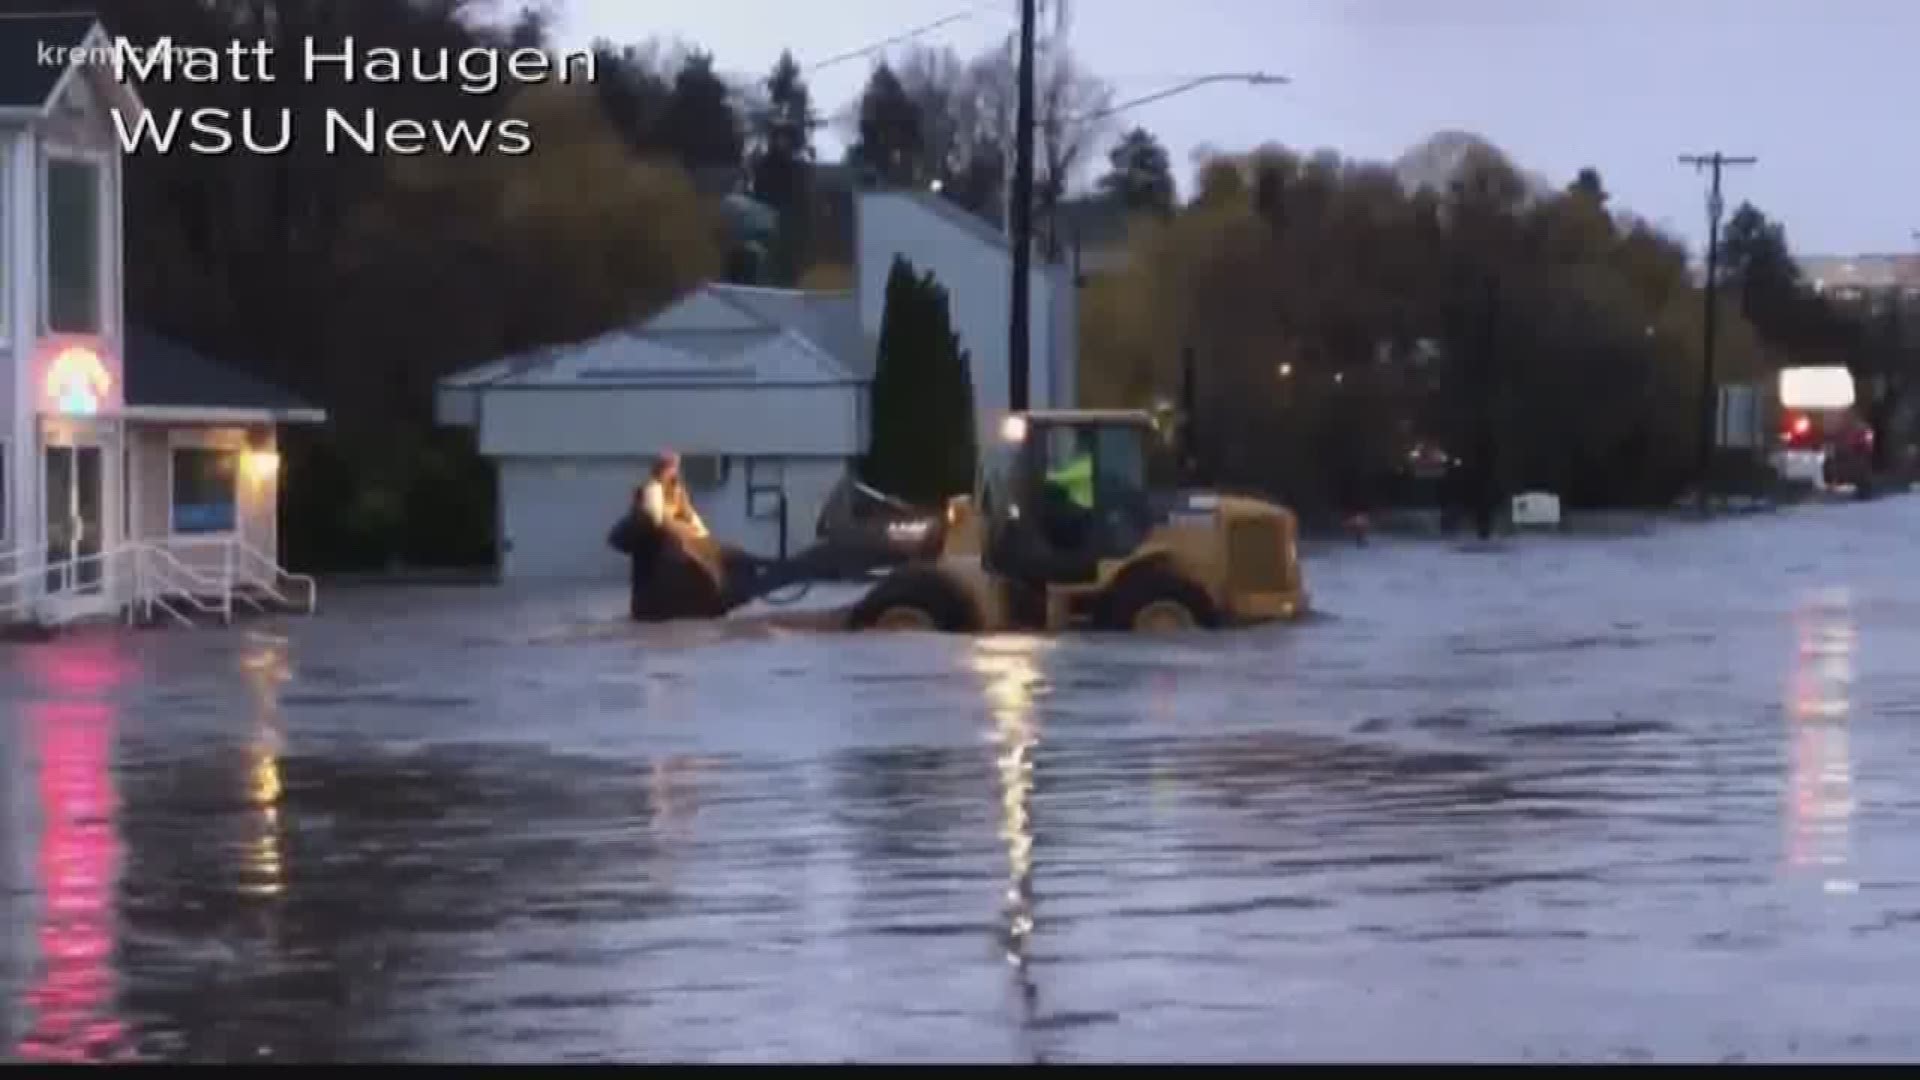 The City of Pullman was fined $2,700 for violations stemming from their rescue efforts during the historic flood.